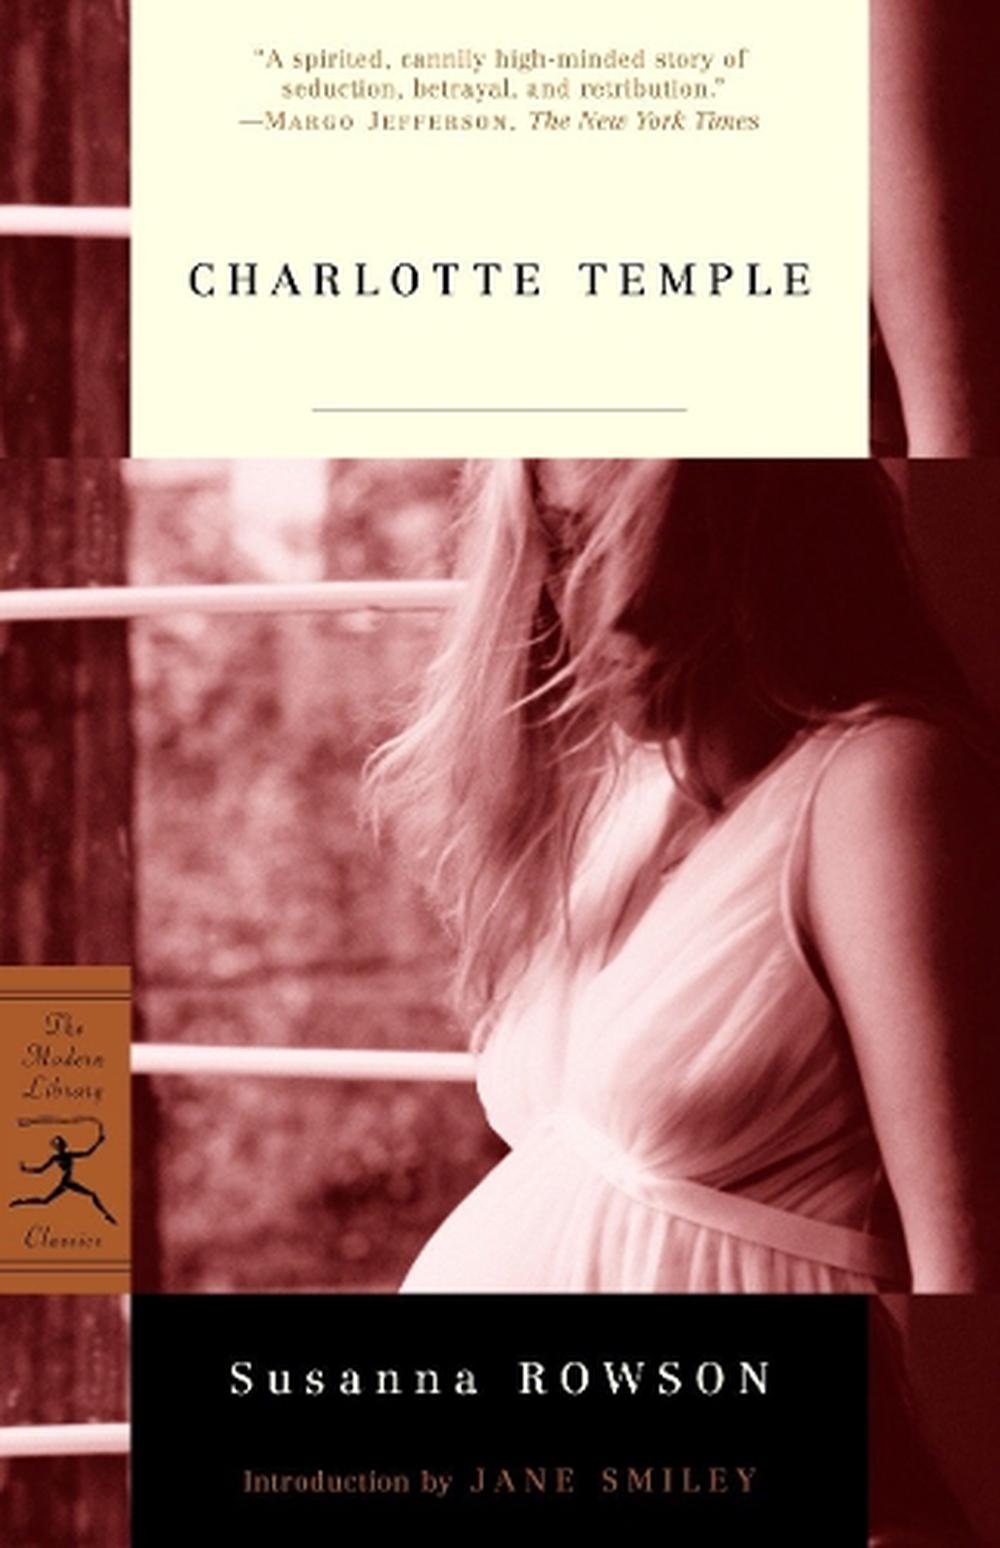 Analysis Of Charlotte Temple By Susanna Rowson